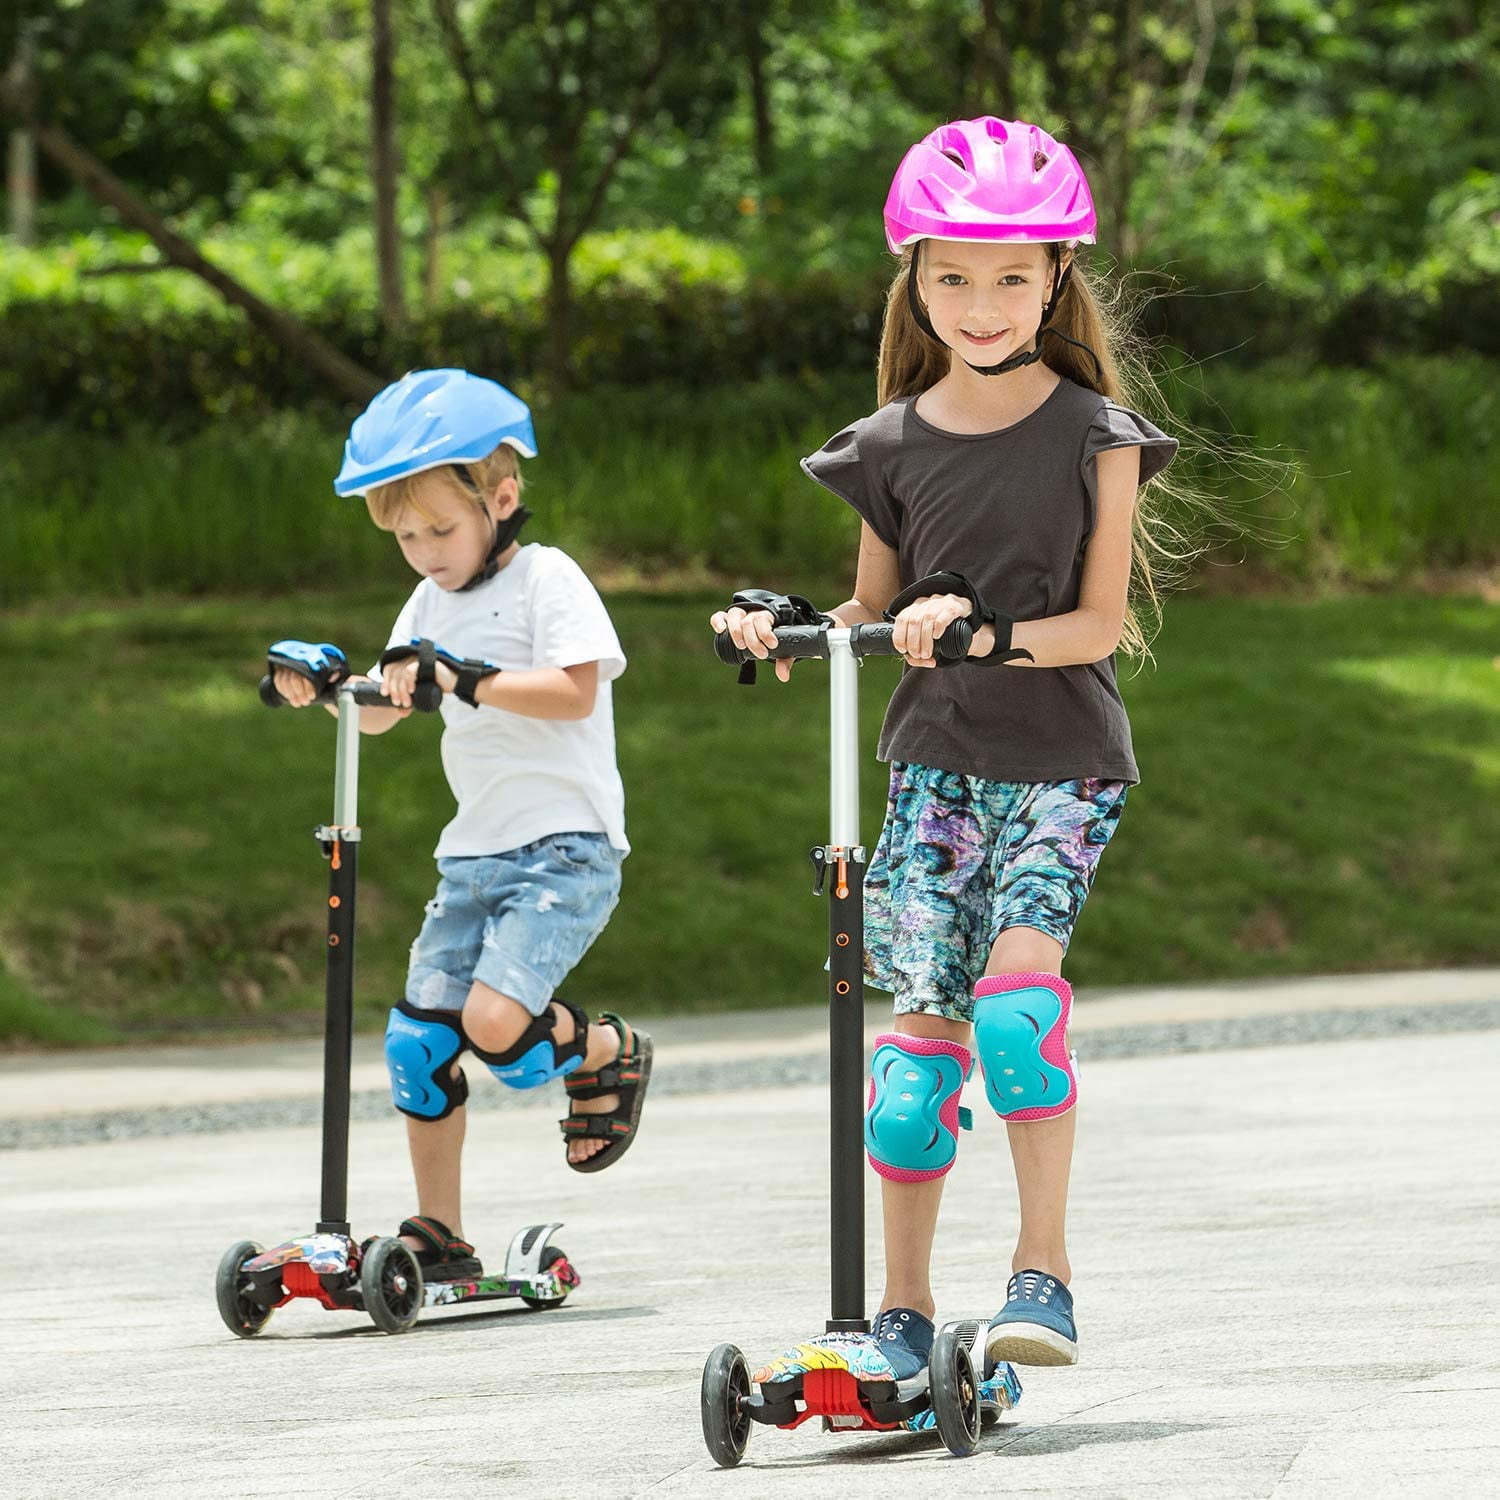 4 Adjustable Height Gotchicon Kick Scooter for Kids 3 Wheel Scooter With Flash Wheels for Toddlers Girls & Boys 